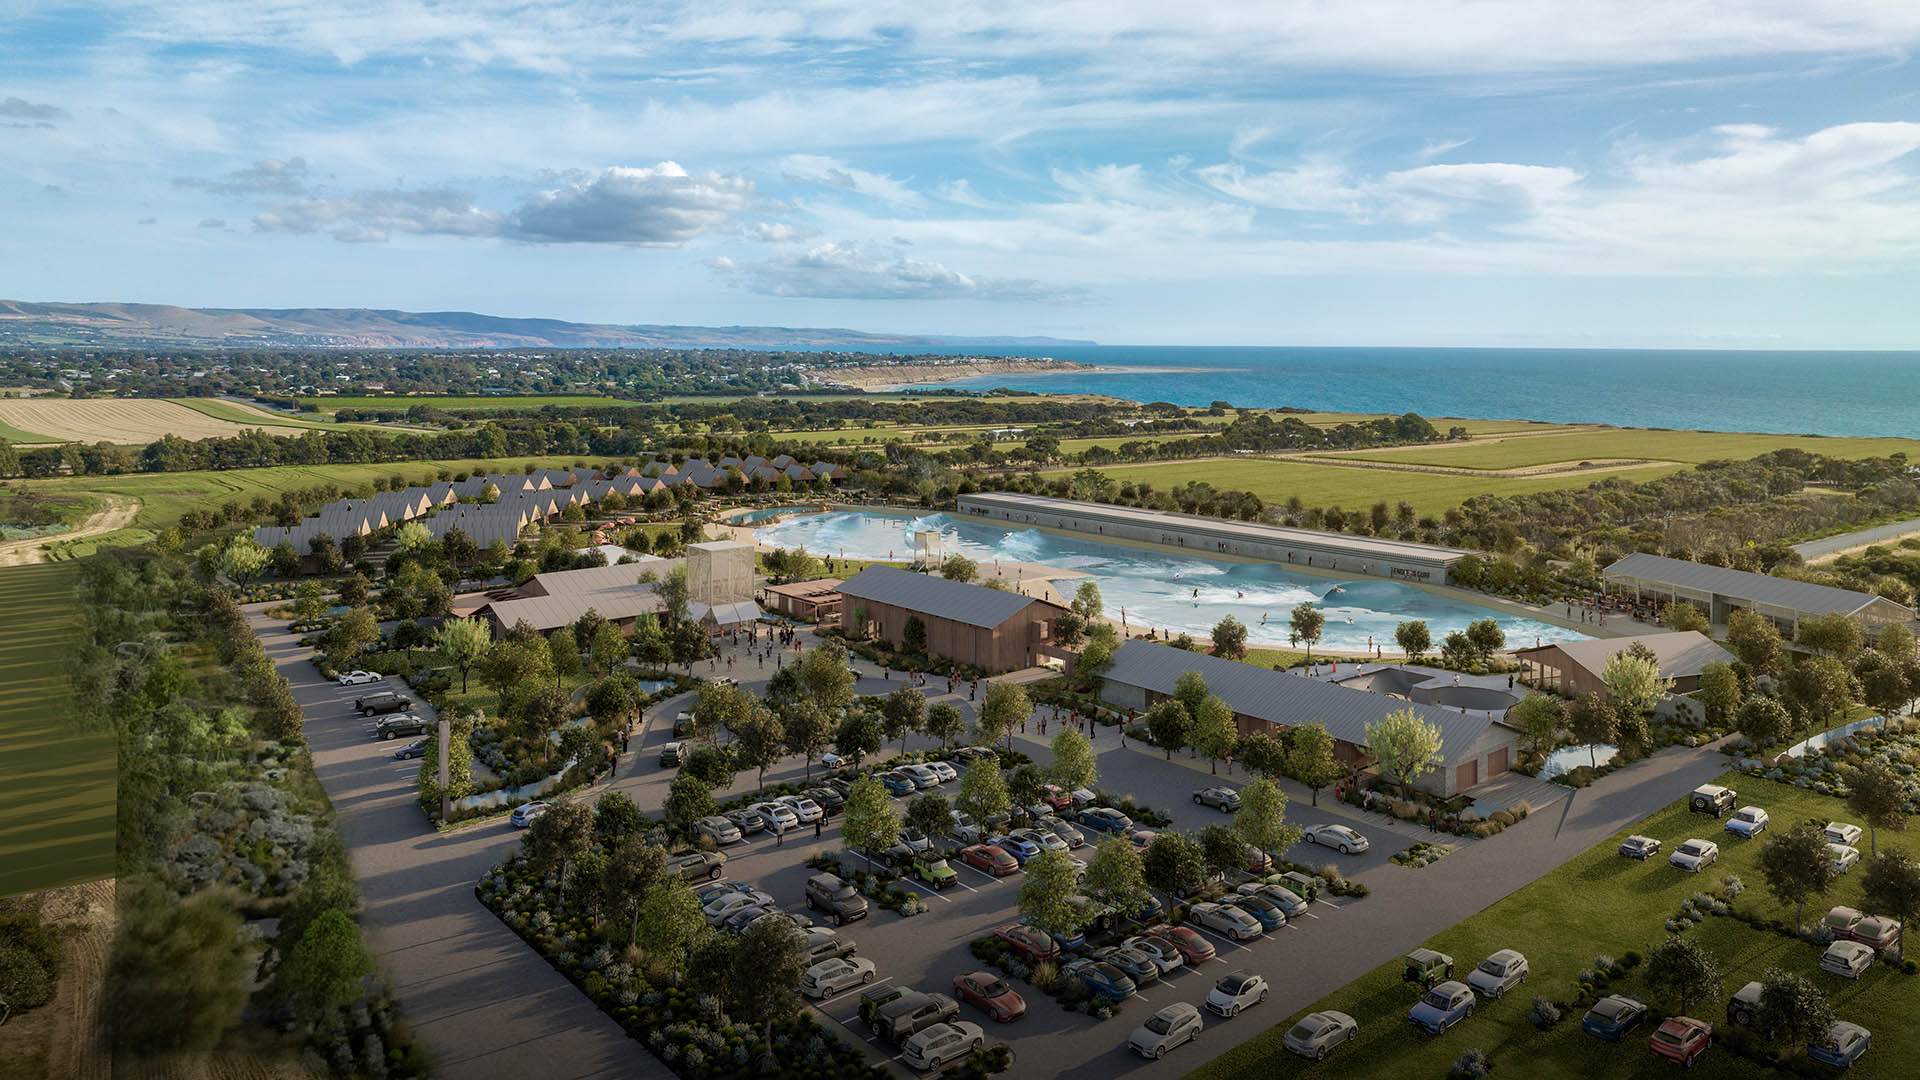 South Australia's Fleurieu Peninsula Is Set to Score a Massive Surf Park with 35 Villas So You Can Stay Onsite